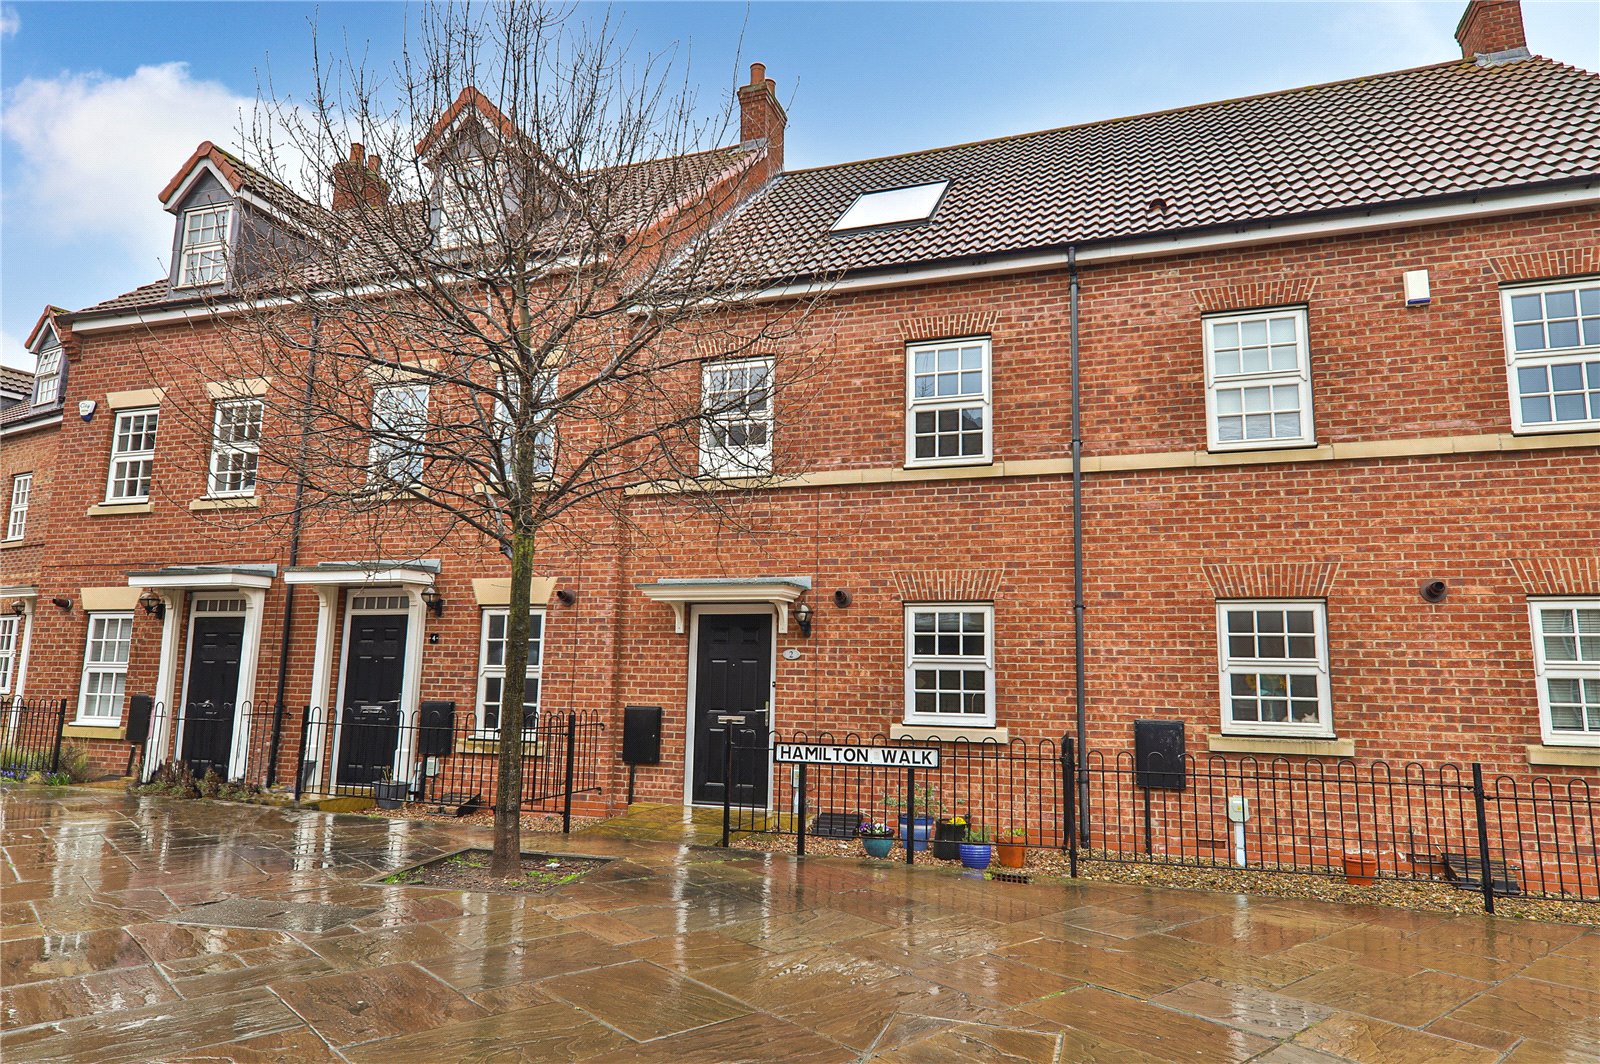 3 bed house for sale in Hamilton Walk, Beverley 0